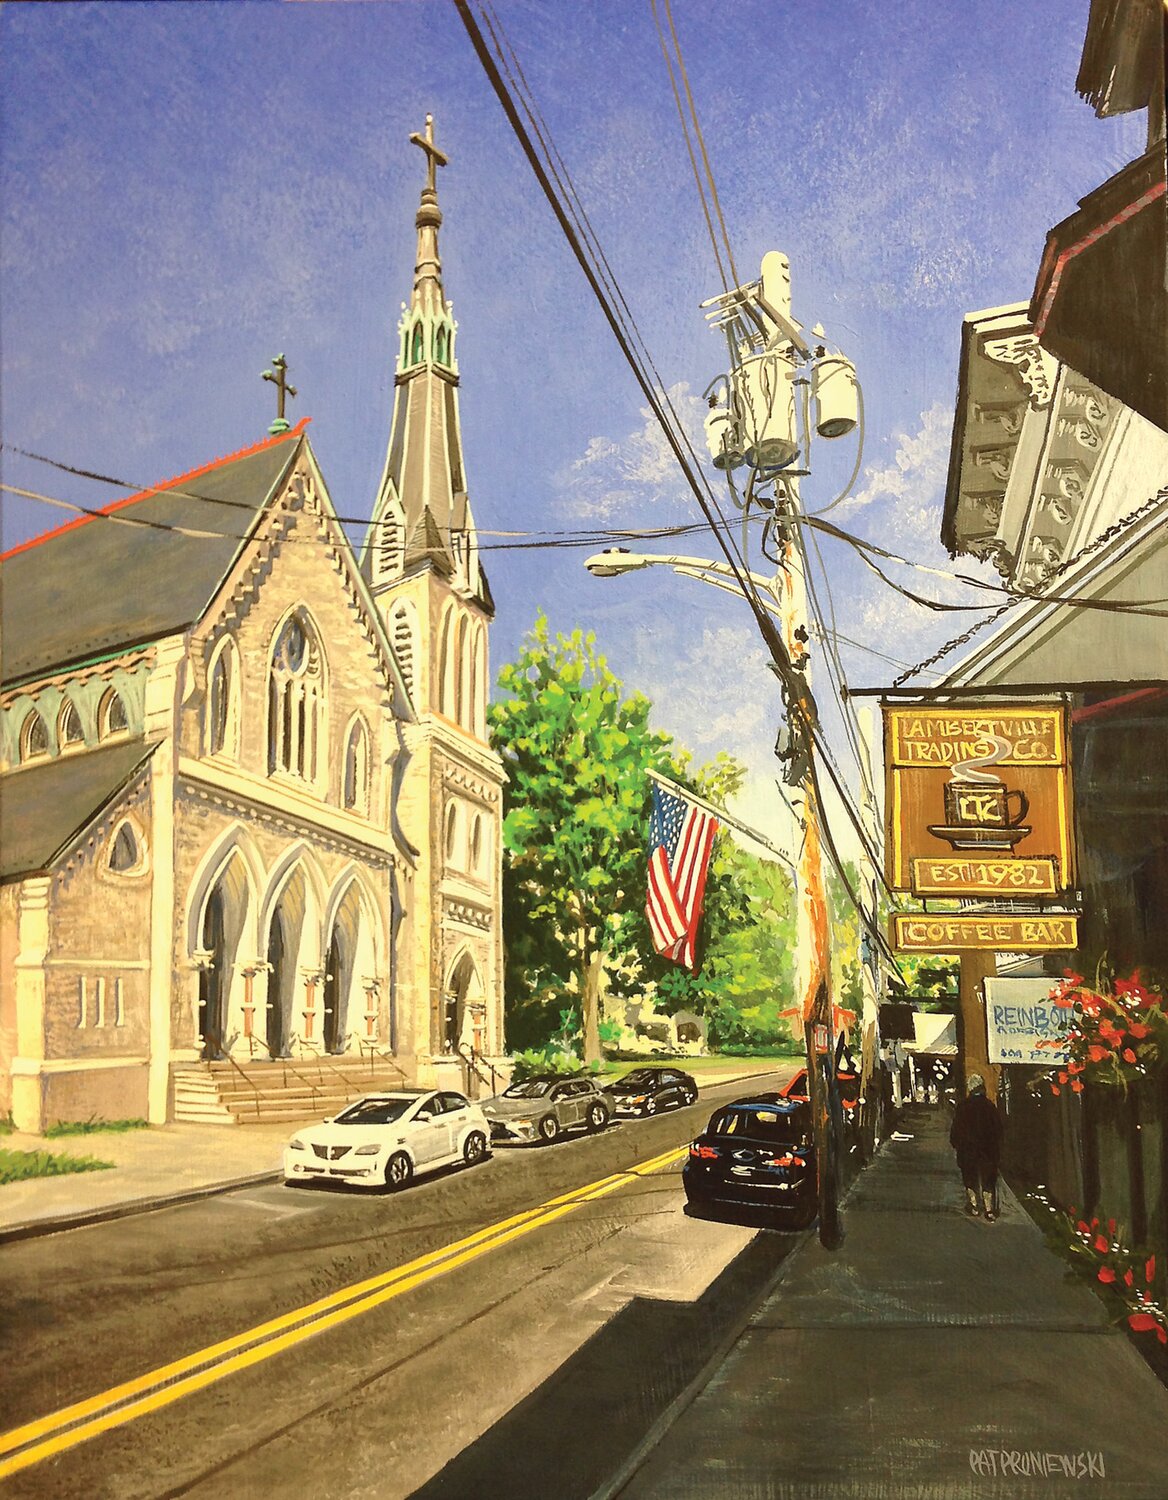 Strong sunlight picks out every architectural detail on the Lambertville church in “Bridge Street Stroll” and renders the opposite side of the street as a shadow world of darker values.